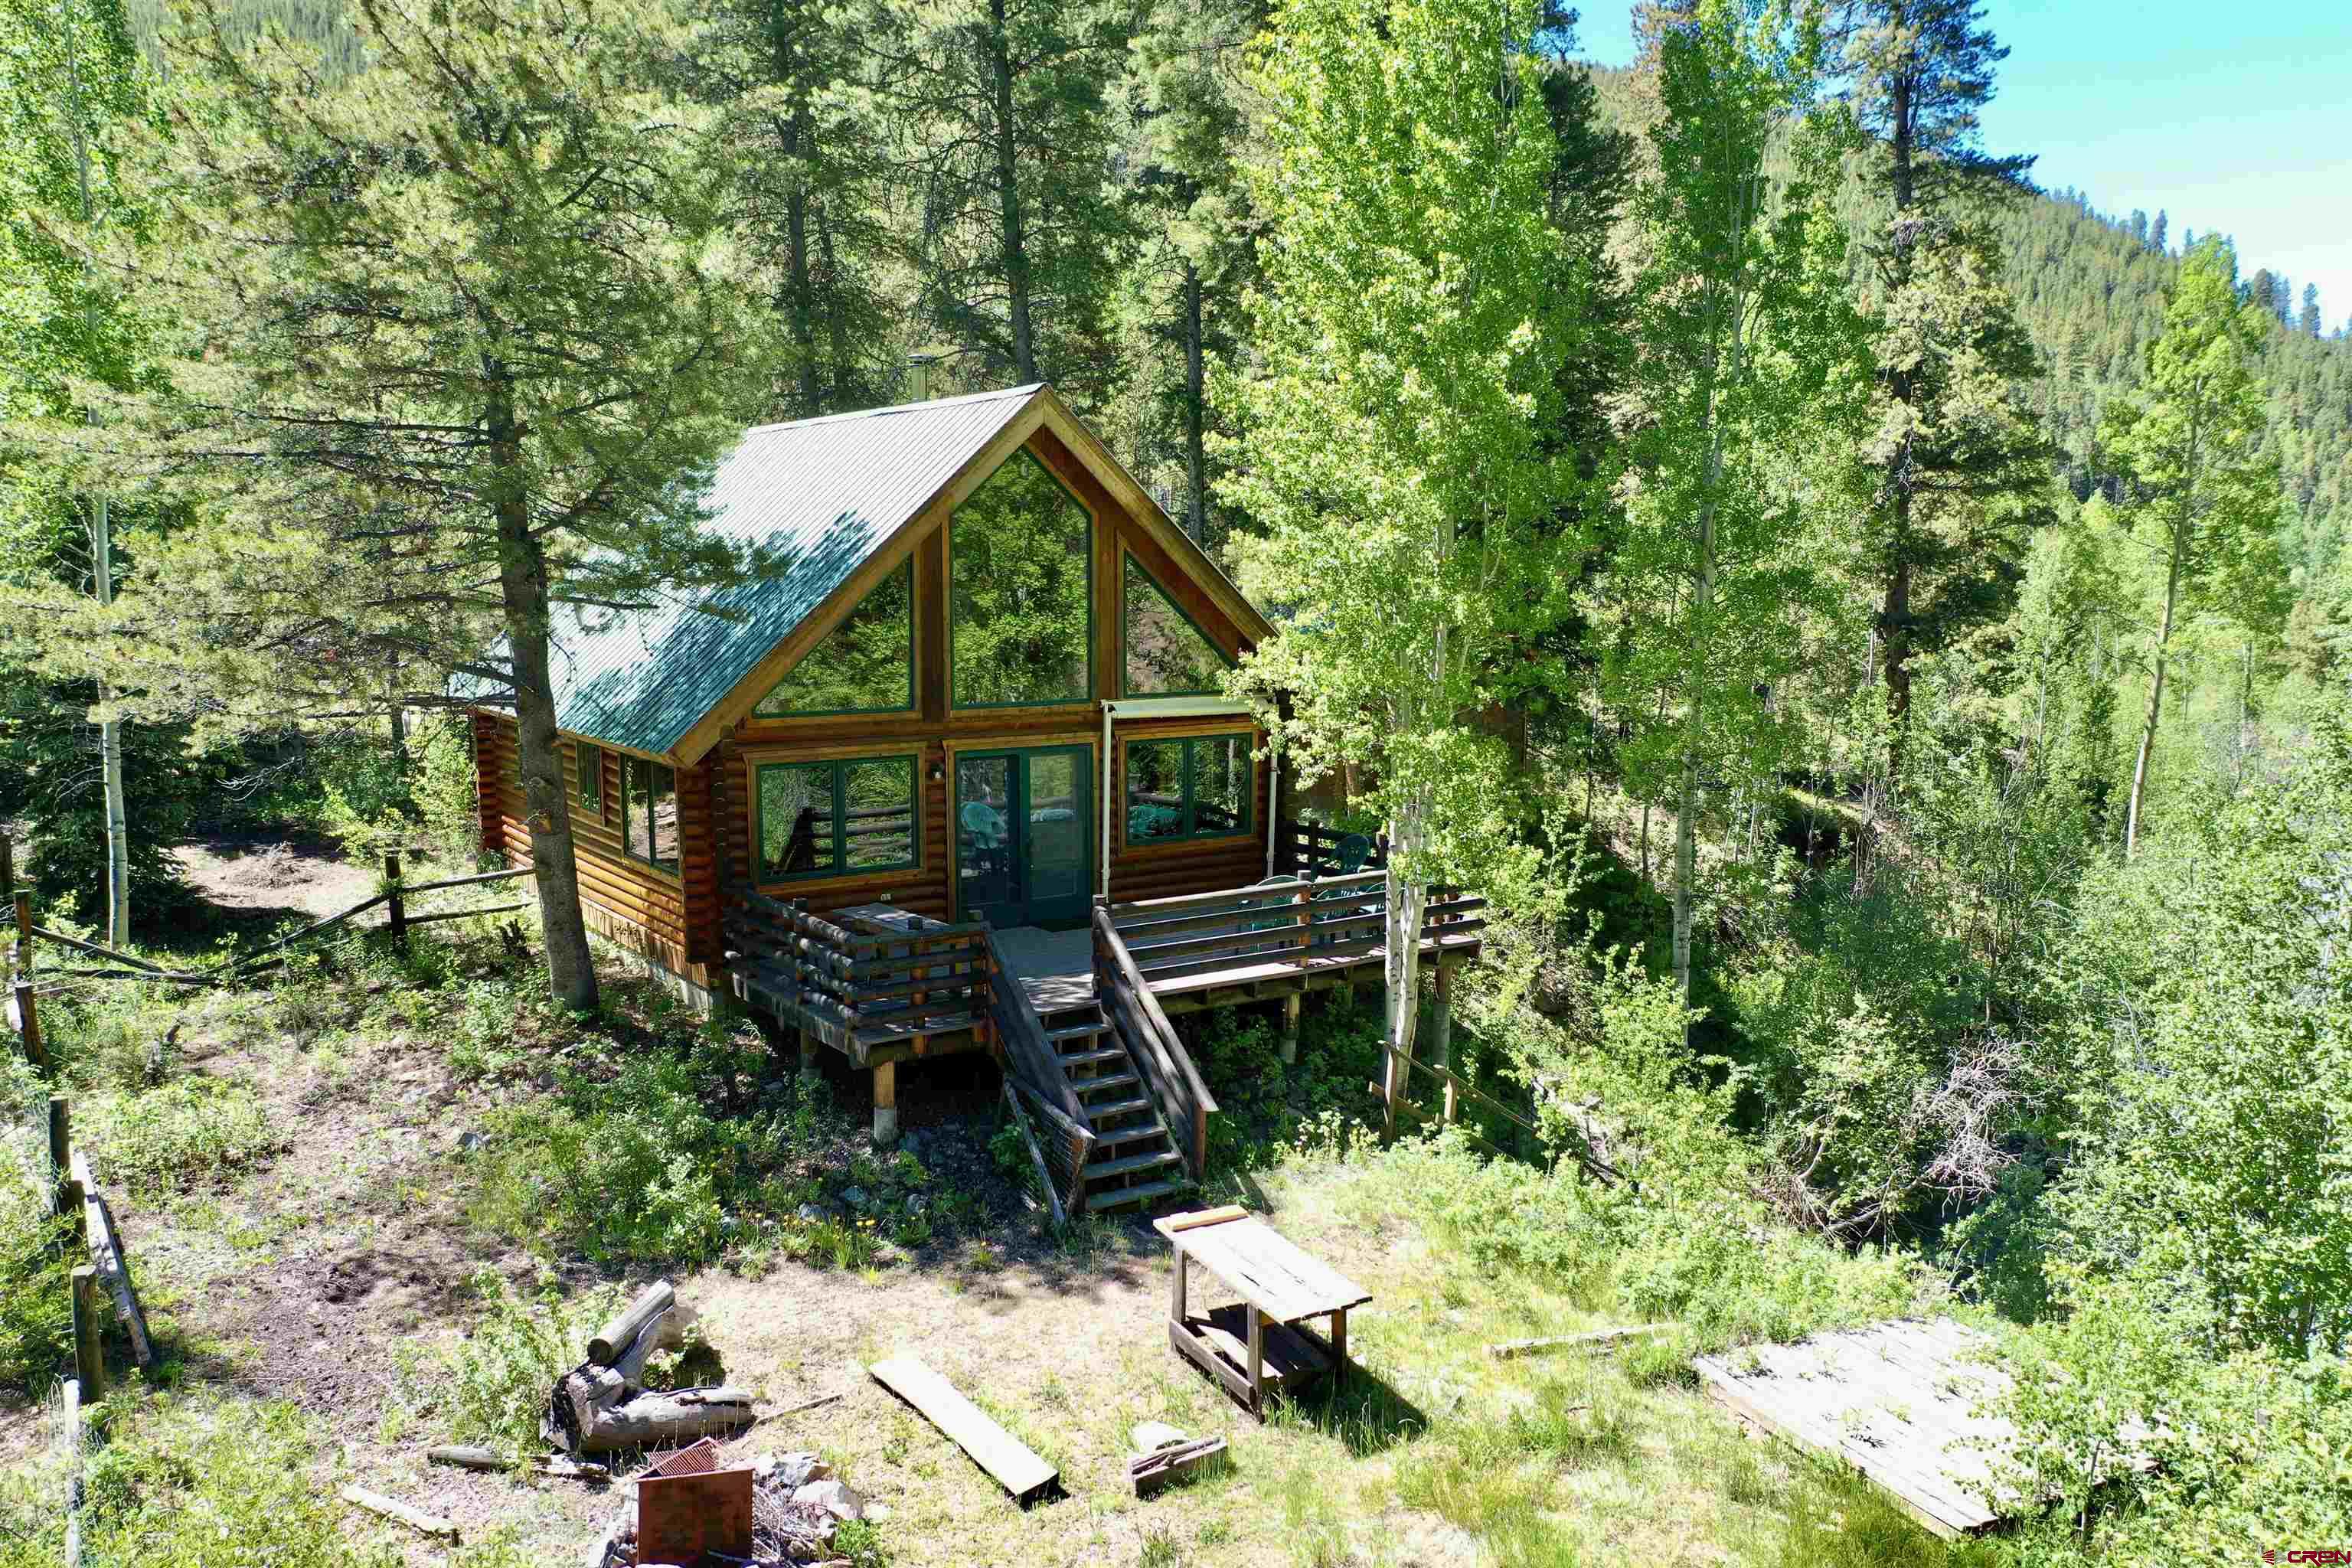 Welcome Home to your 1 bedroom/1 bath mountain home with loft nestled in the trees with Gold Creek in the backyard and on 3+/- acres. 3.5 miles from Ohio City and 45 minutes from downtown Gunnison and 30 minutes from the Pitkin area. Property is bordered by national forest. Built in 1994, with well & septic, generator & shed and approximately 1,008 square feet. Off-grid cabin in the Colorado mountains is close to hiking and 4-wheeling trails. This property has other locations to park additional RV's and camp trailers to make this the family summer cabin! Schedule your showing soon and enjoy the rest of summer on the back deck!